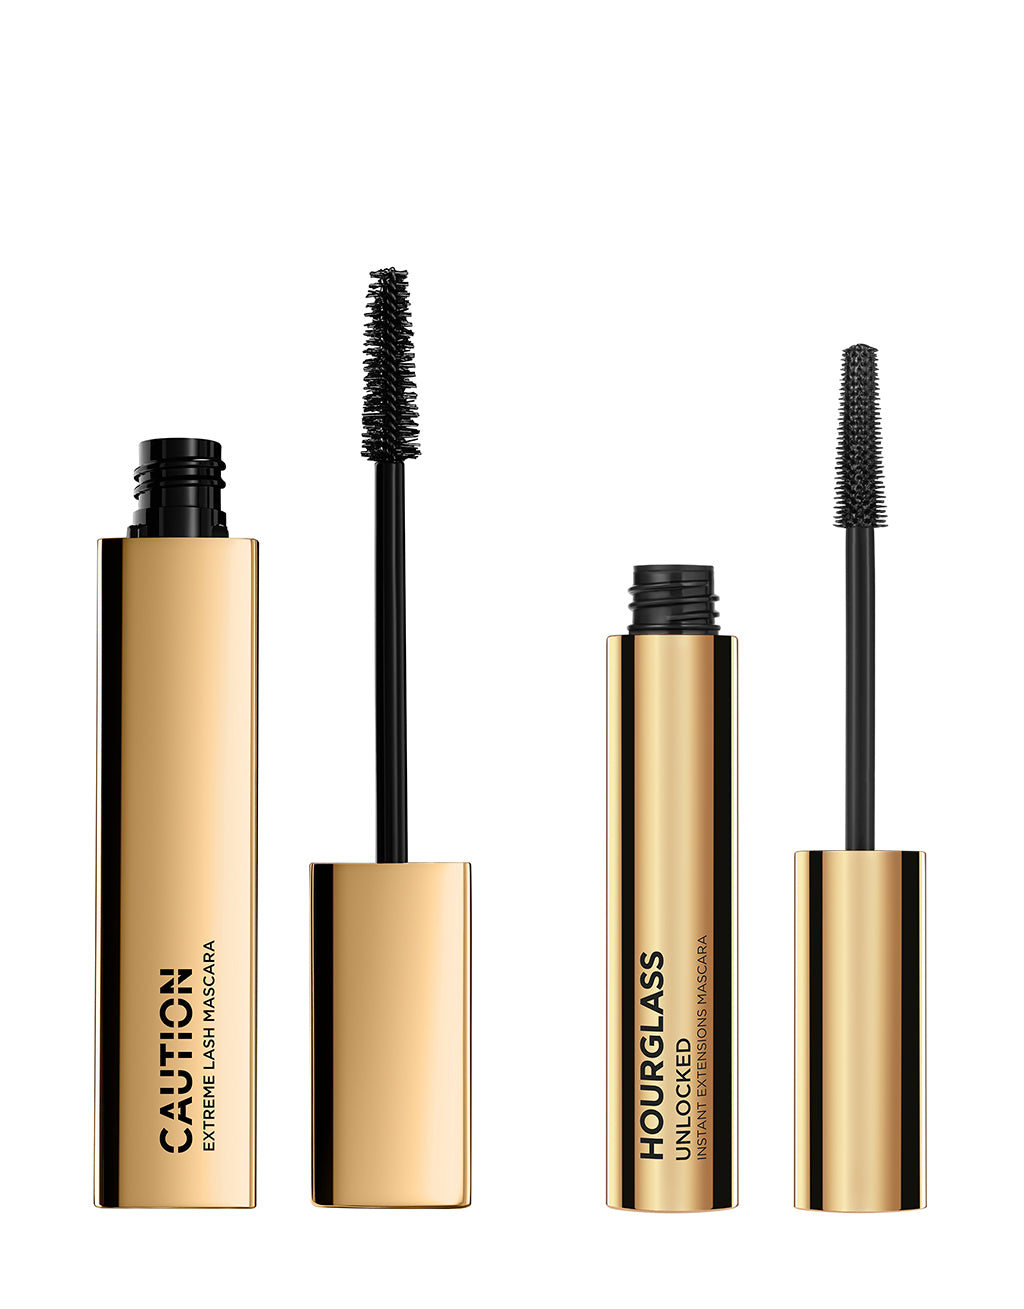 WHICH HOURGLASS MASCARA IS BETTER CAUTION OR UNLOCKED? 